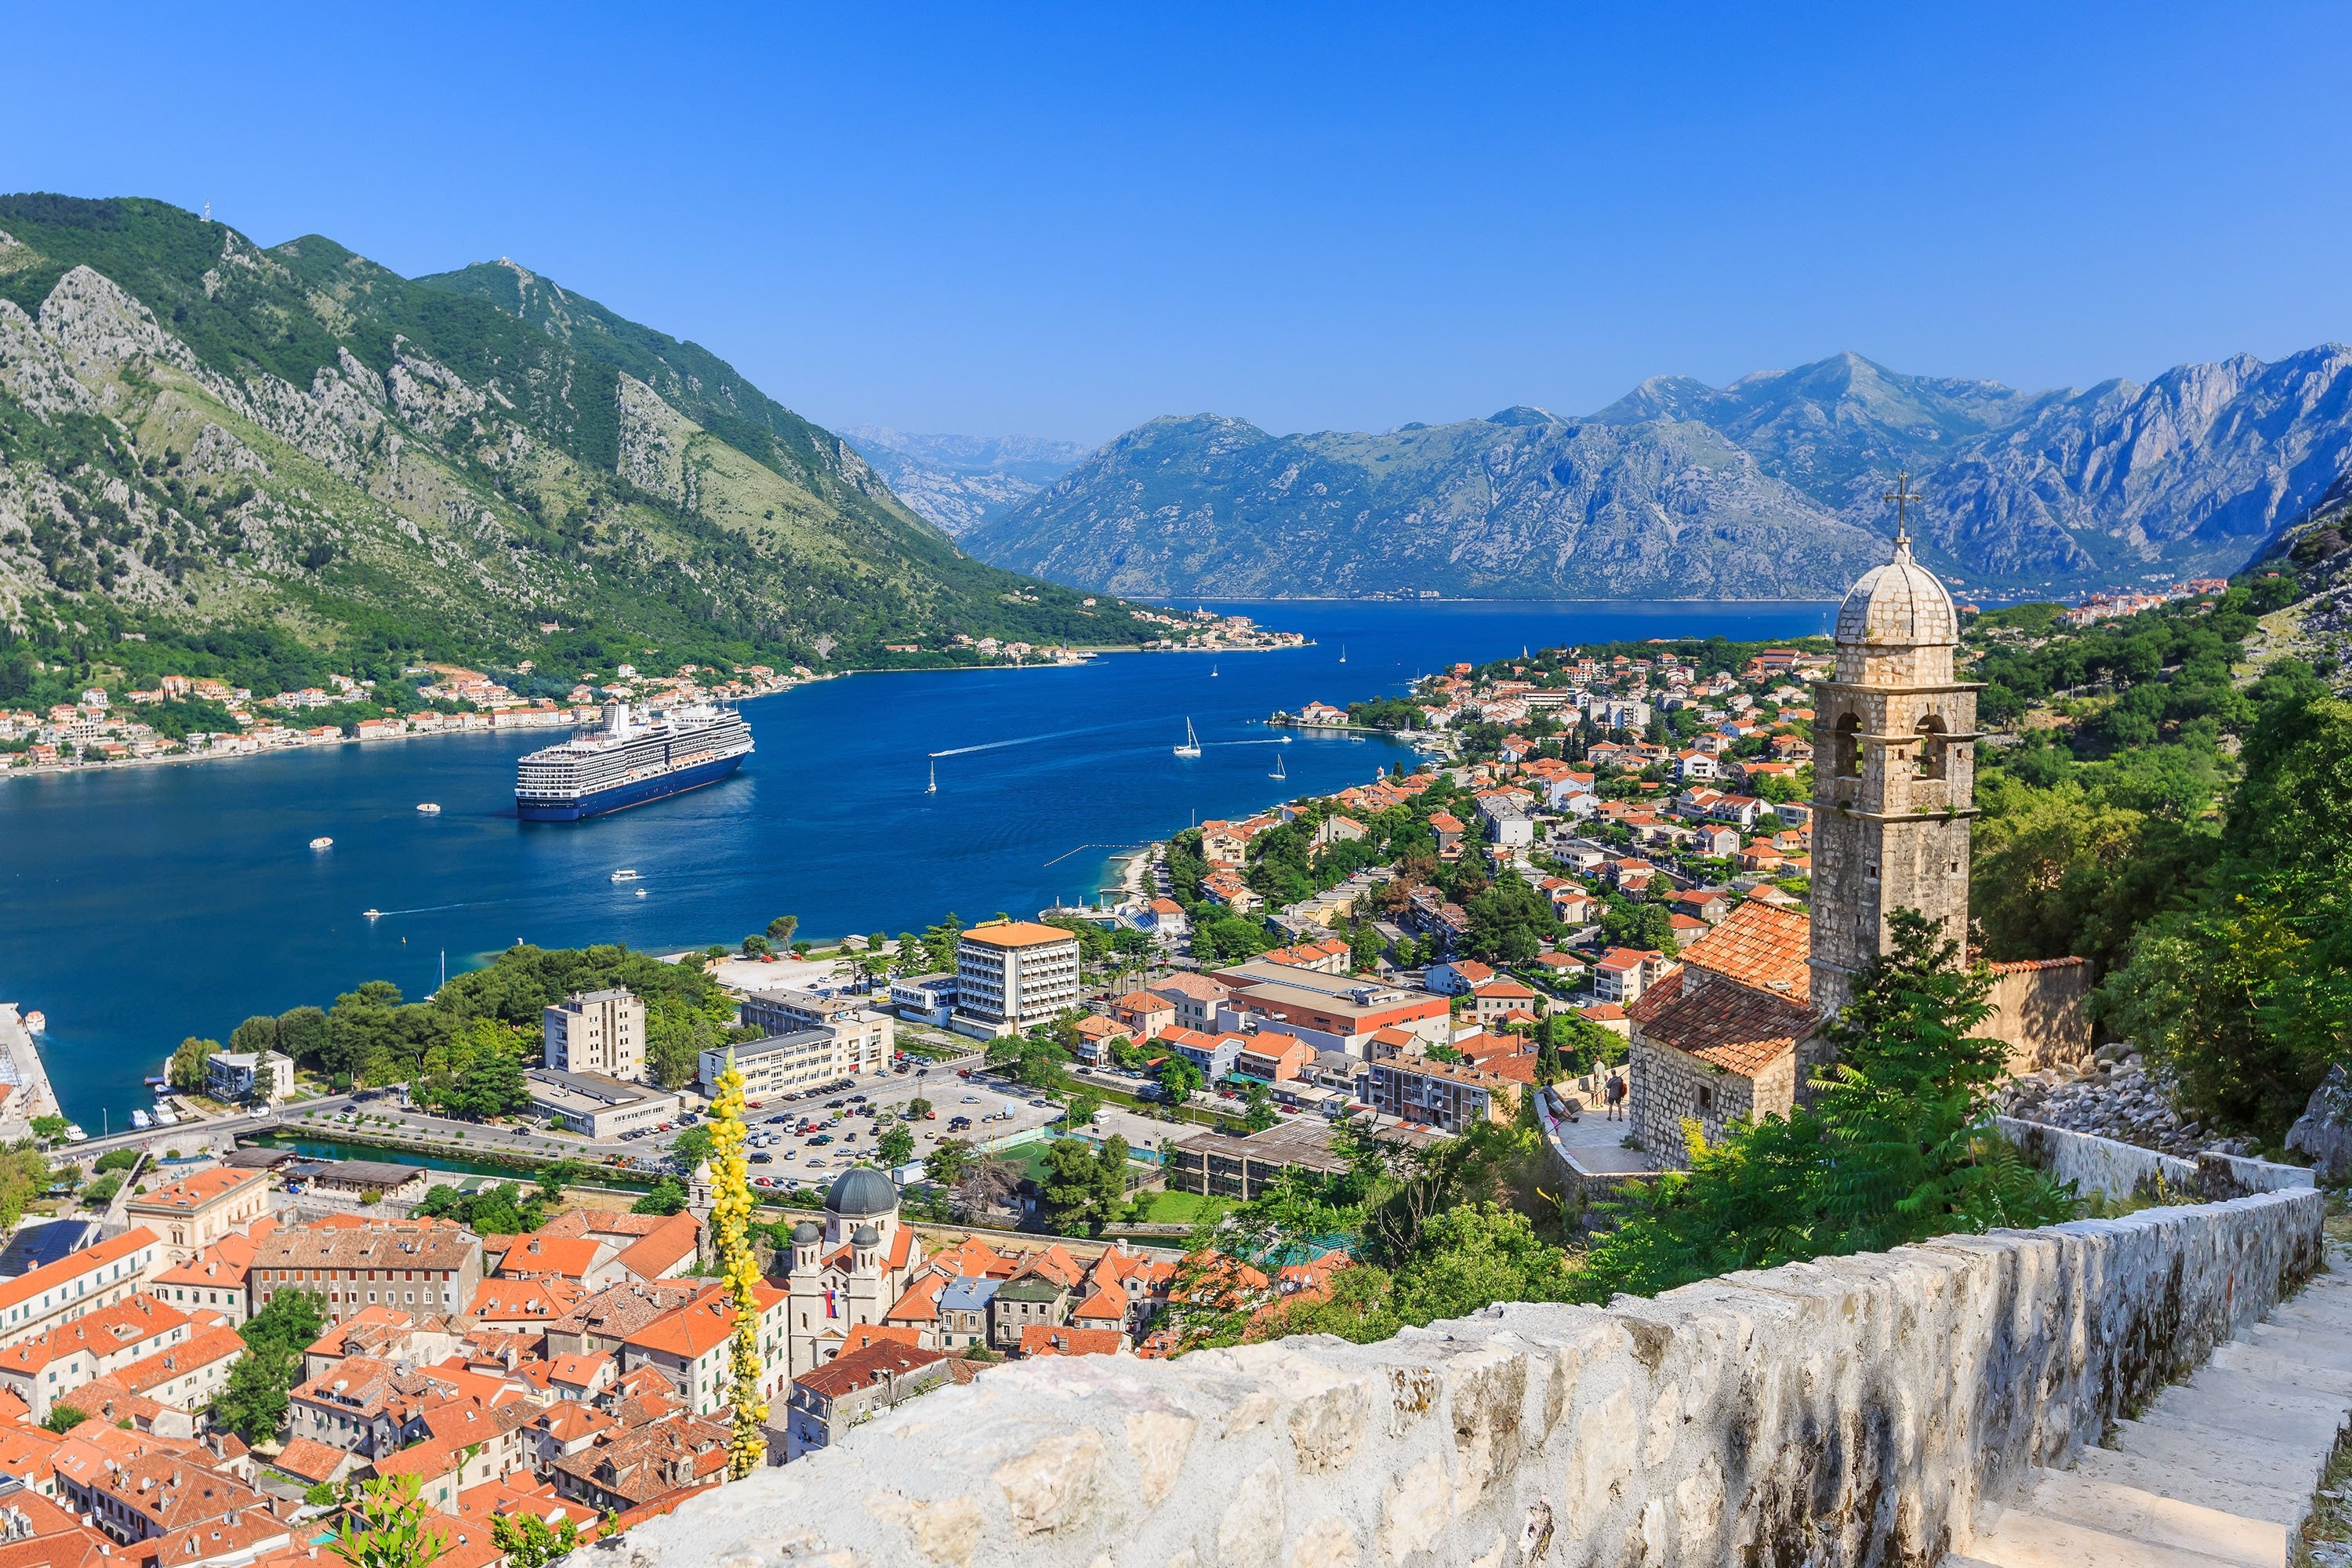 From the skirts of Mount Lovcen, a giant cruise ship approaches the Old Town part of the city of Kotor in Kotor Bay, Montenegro. (Shutterstock Photo)